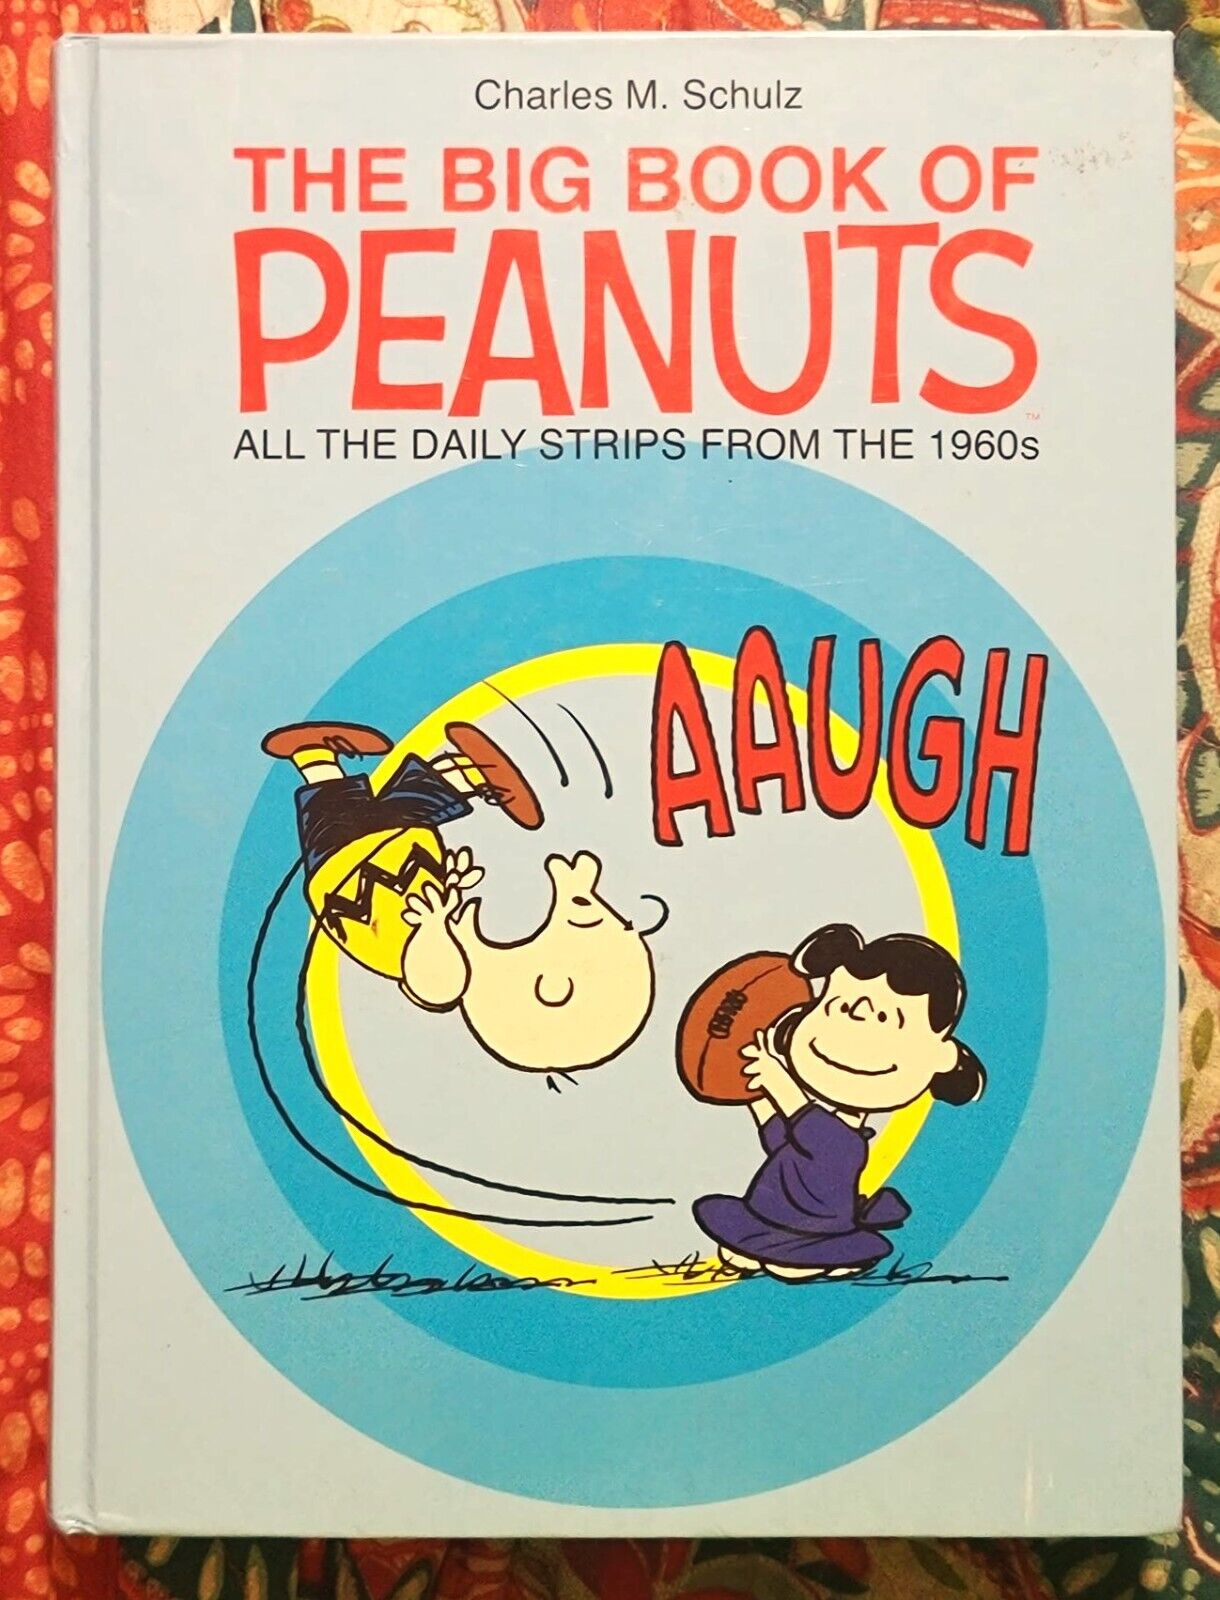 Big Book Peanuts: All Daily Strips 1960s by Charles Schulz (HC, 2015) VG